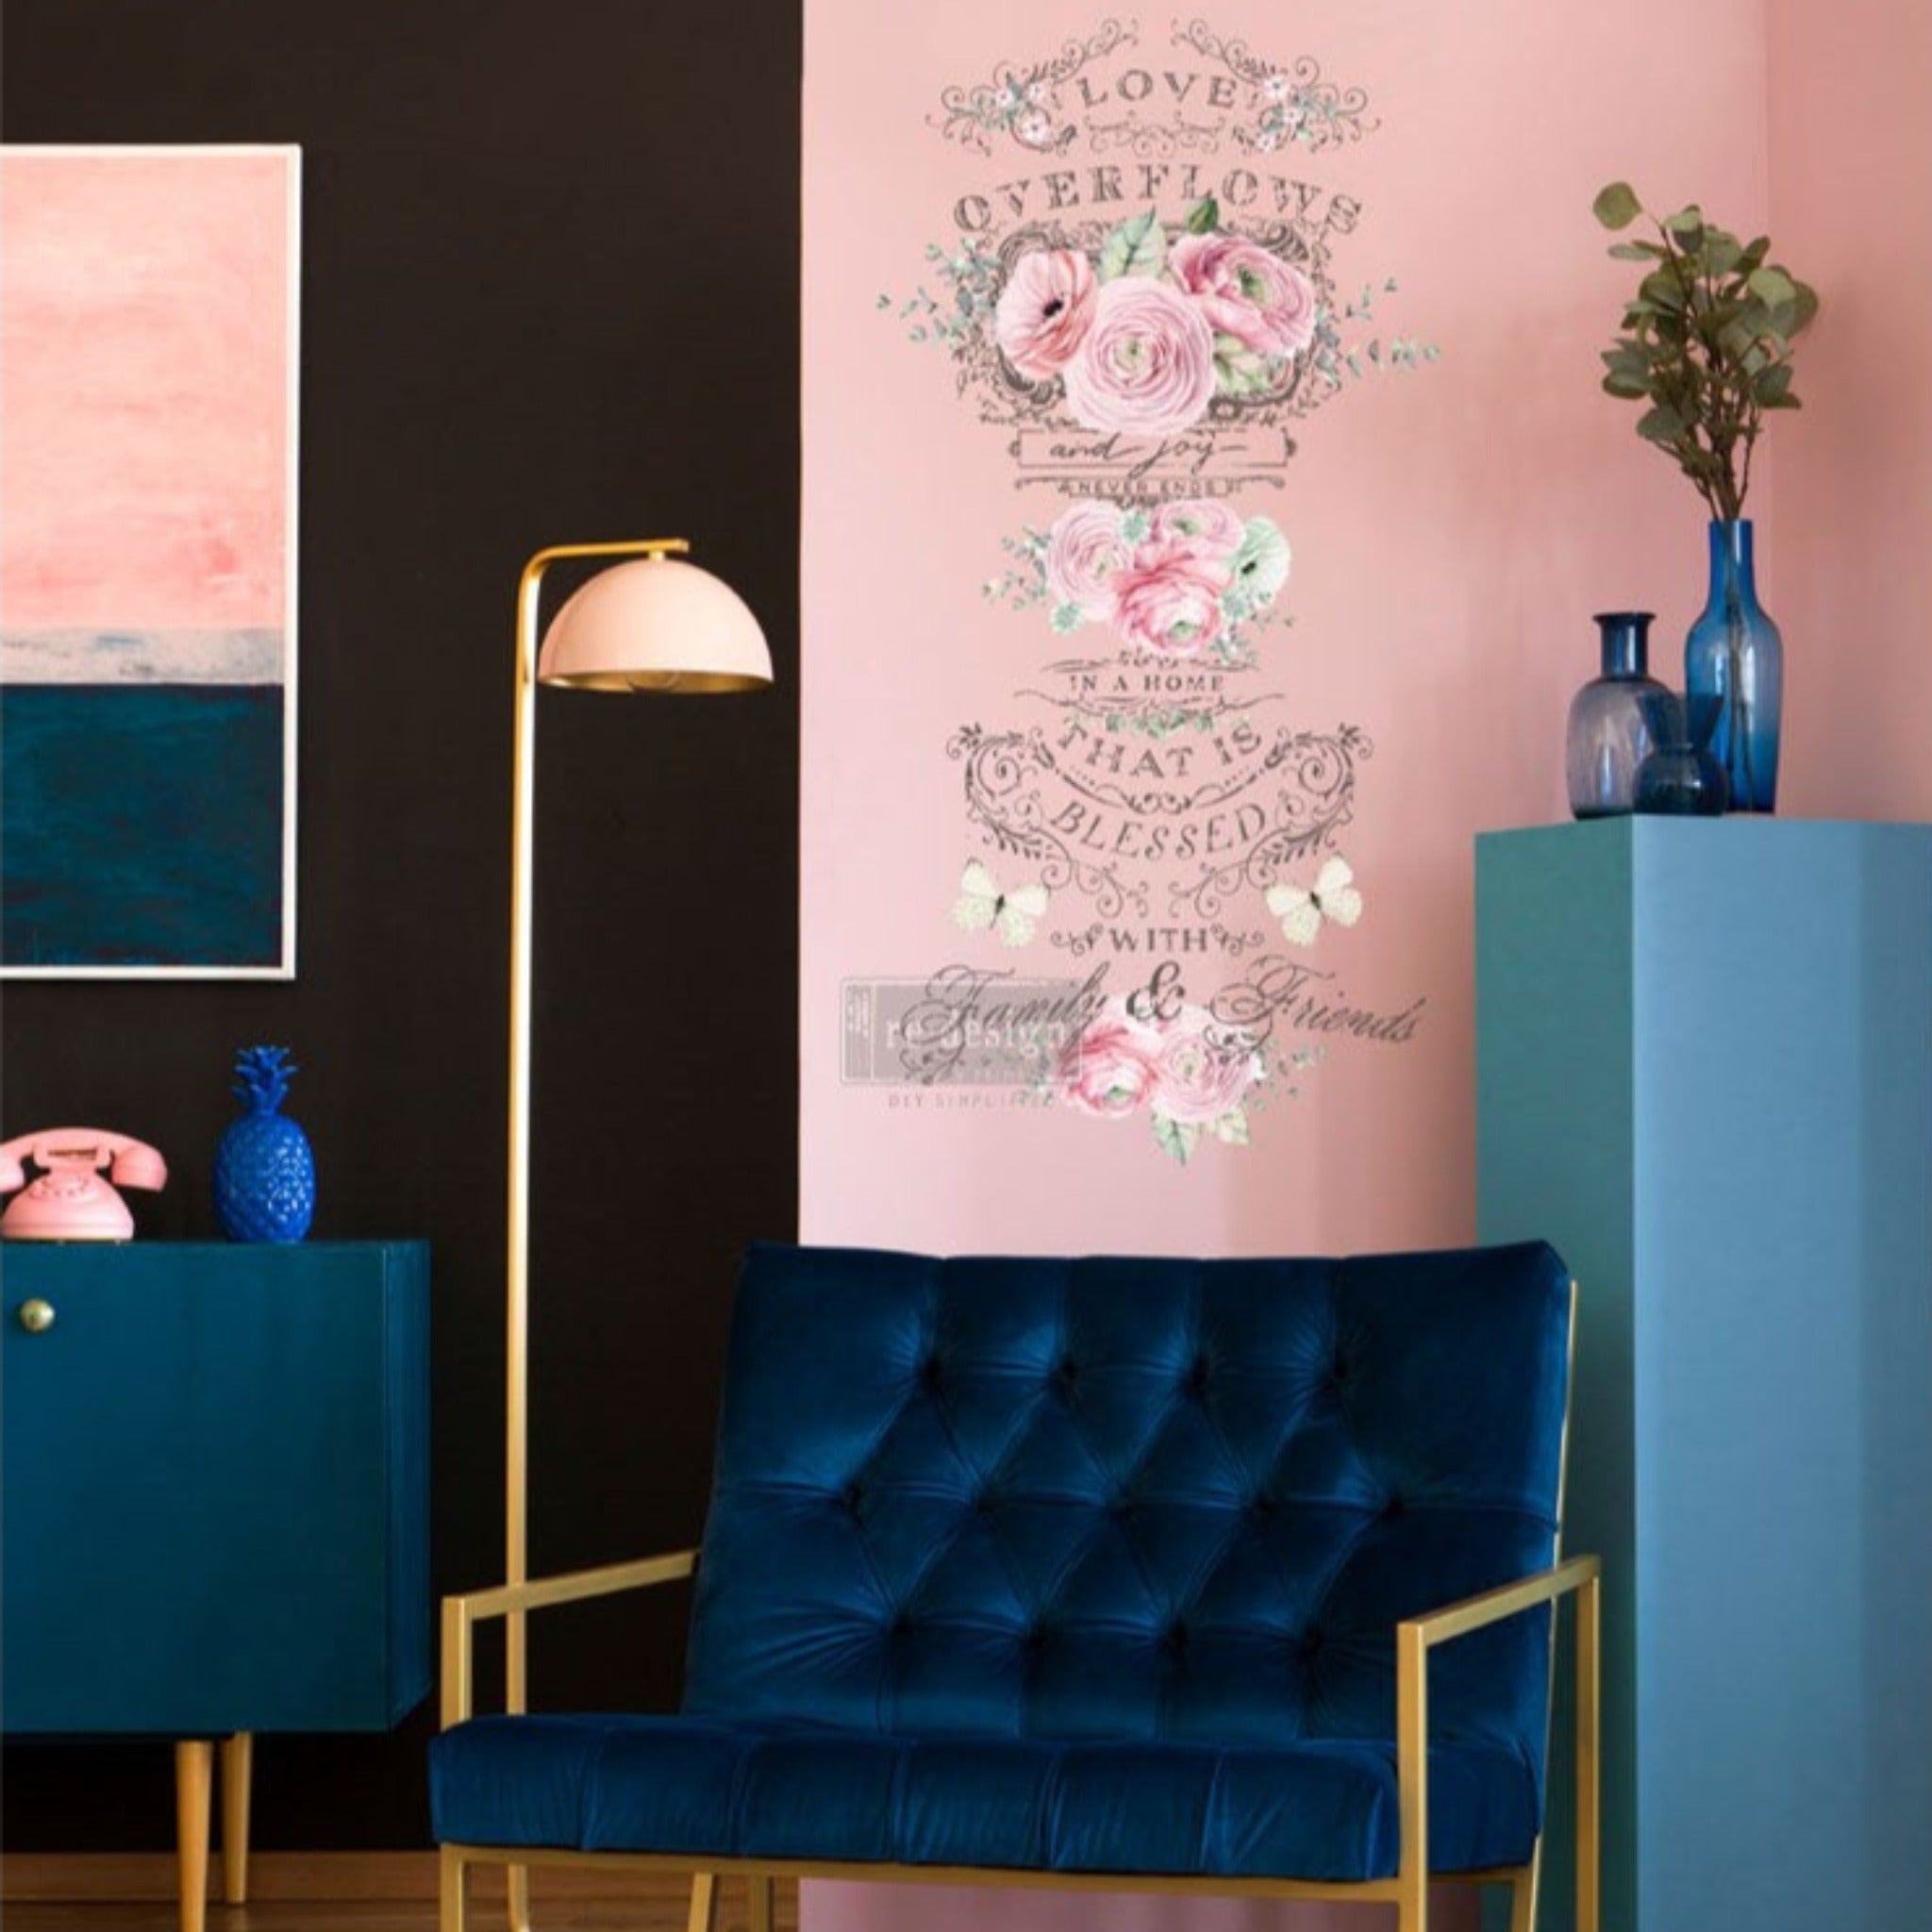 ReDesign with Prima's Overflowing Love transfer is featured on a light pink wall behind a midcentury blue velvet sitting chair.